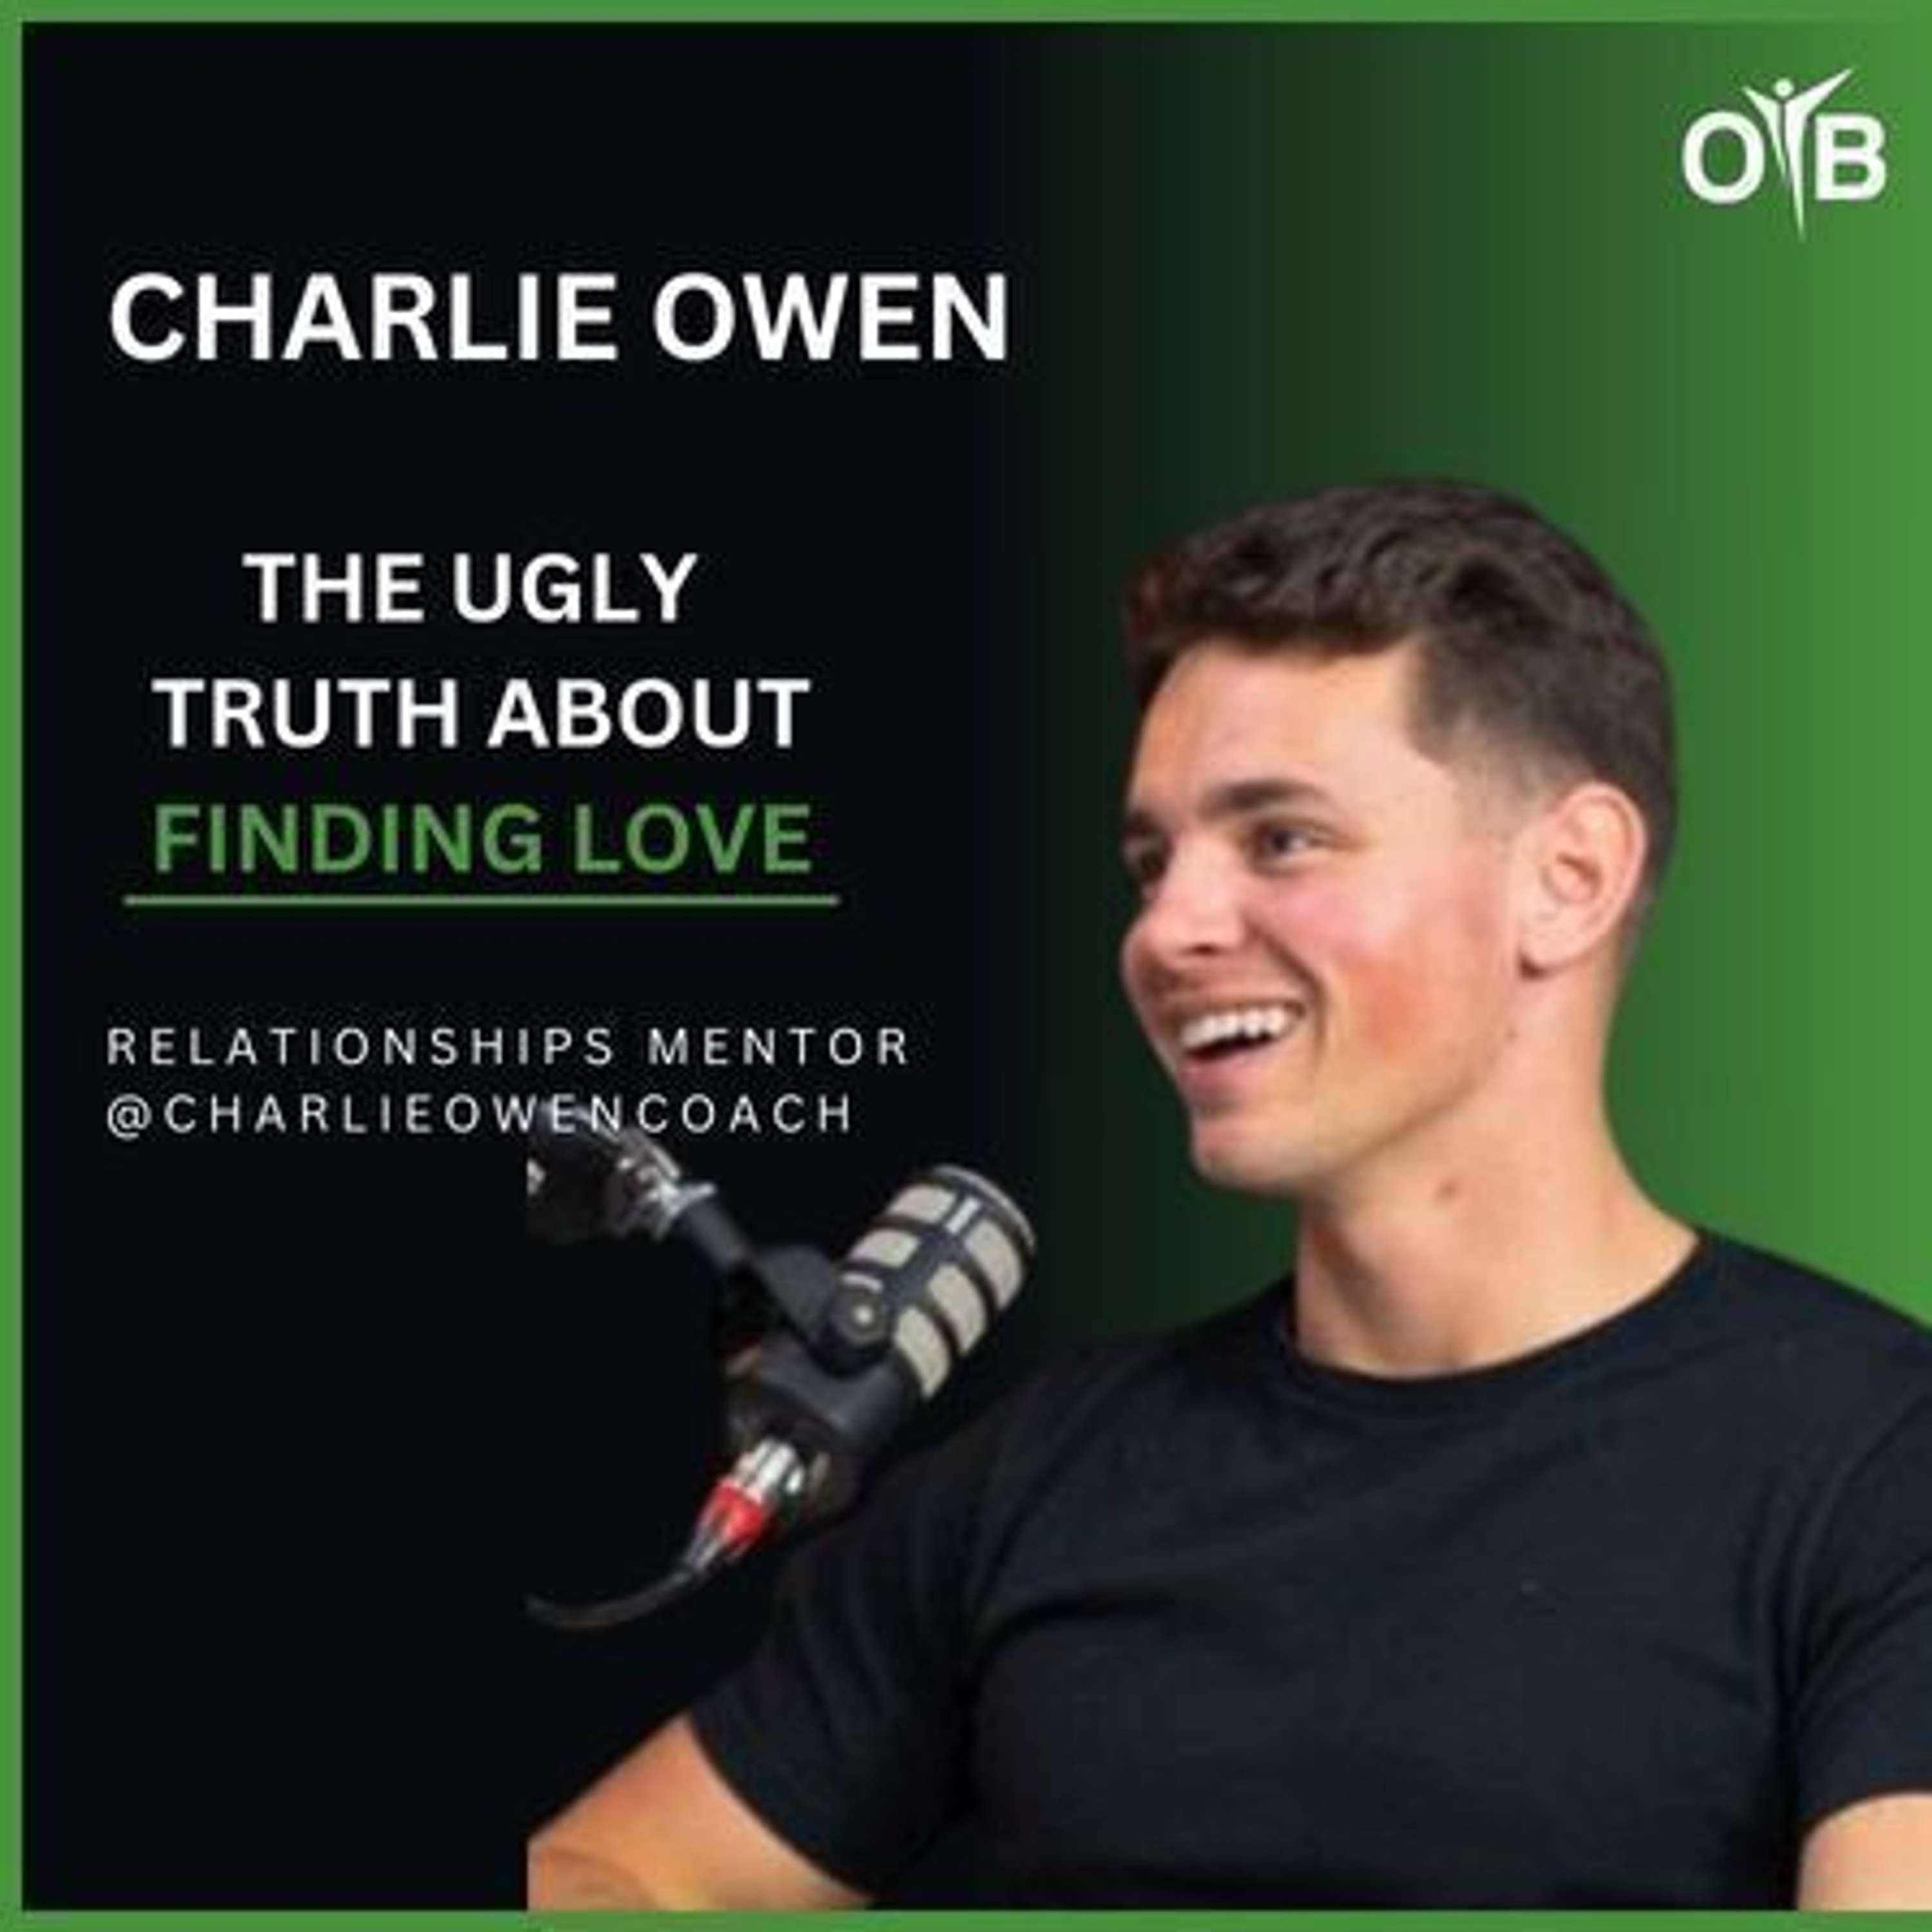 Charlie Owen - The Ugly Truth About Finding Love